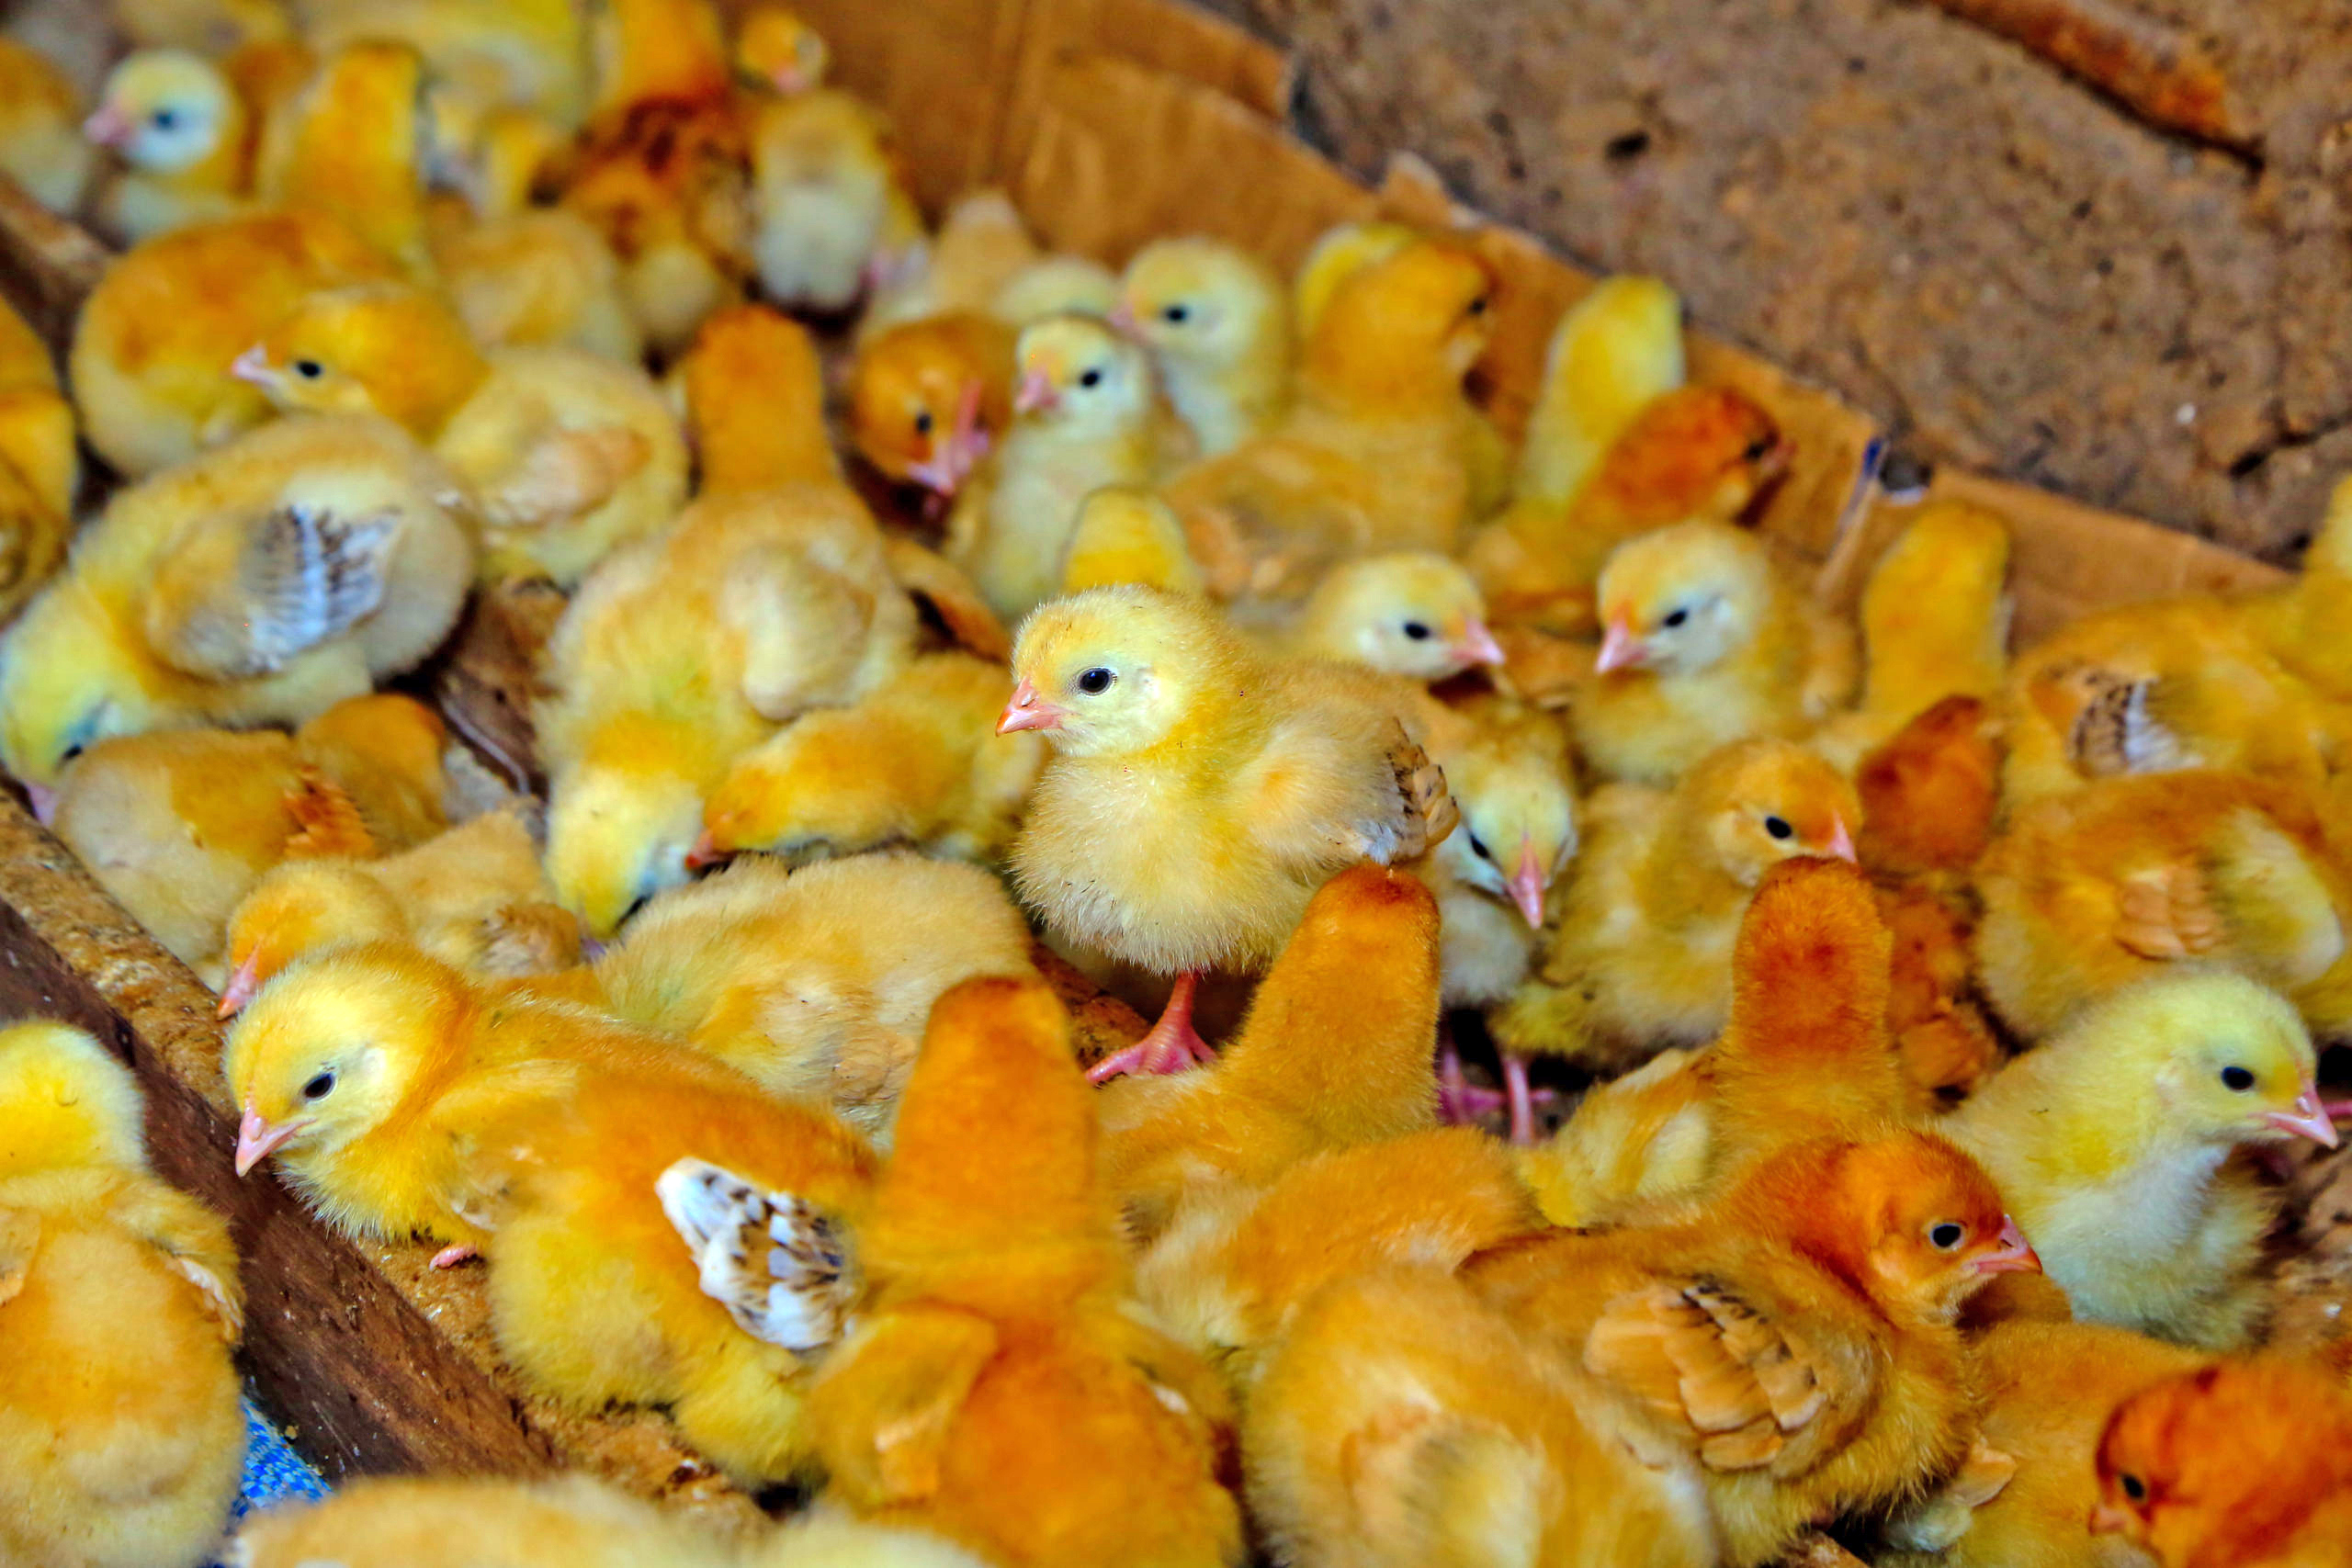 Some of the chicks produced by Uzima Chicken Ltd in Rwanda. A ban imposed on poultry imports in November 2021 remains. Photo: Courtesy.